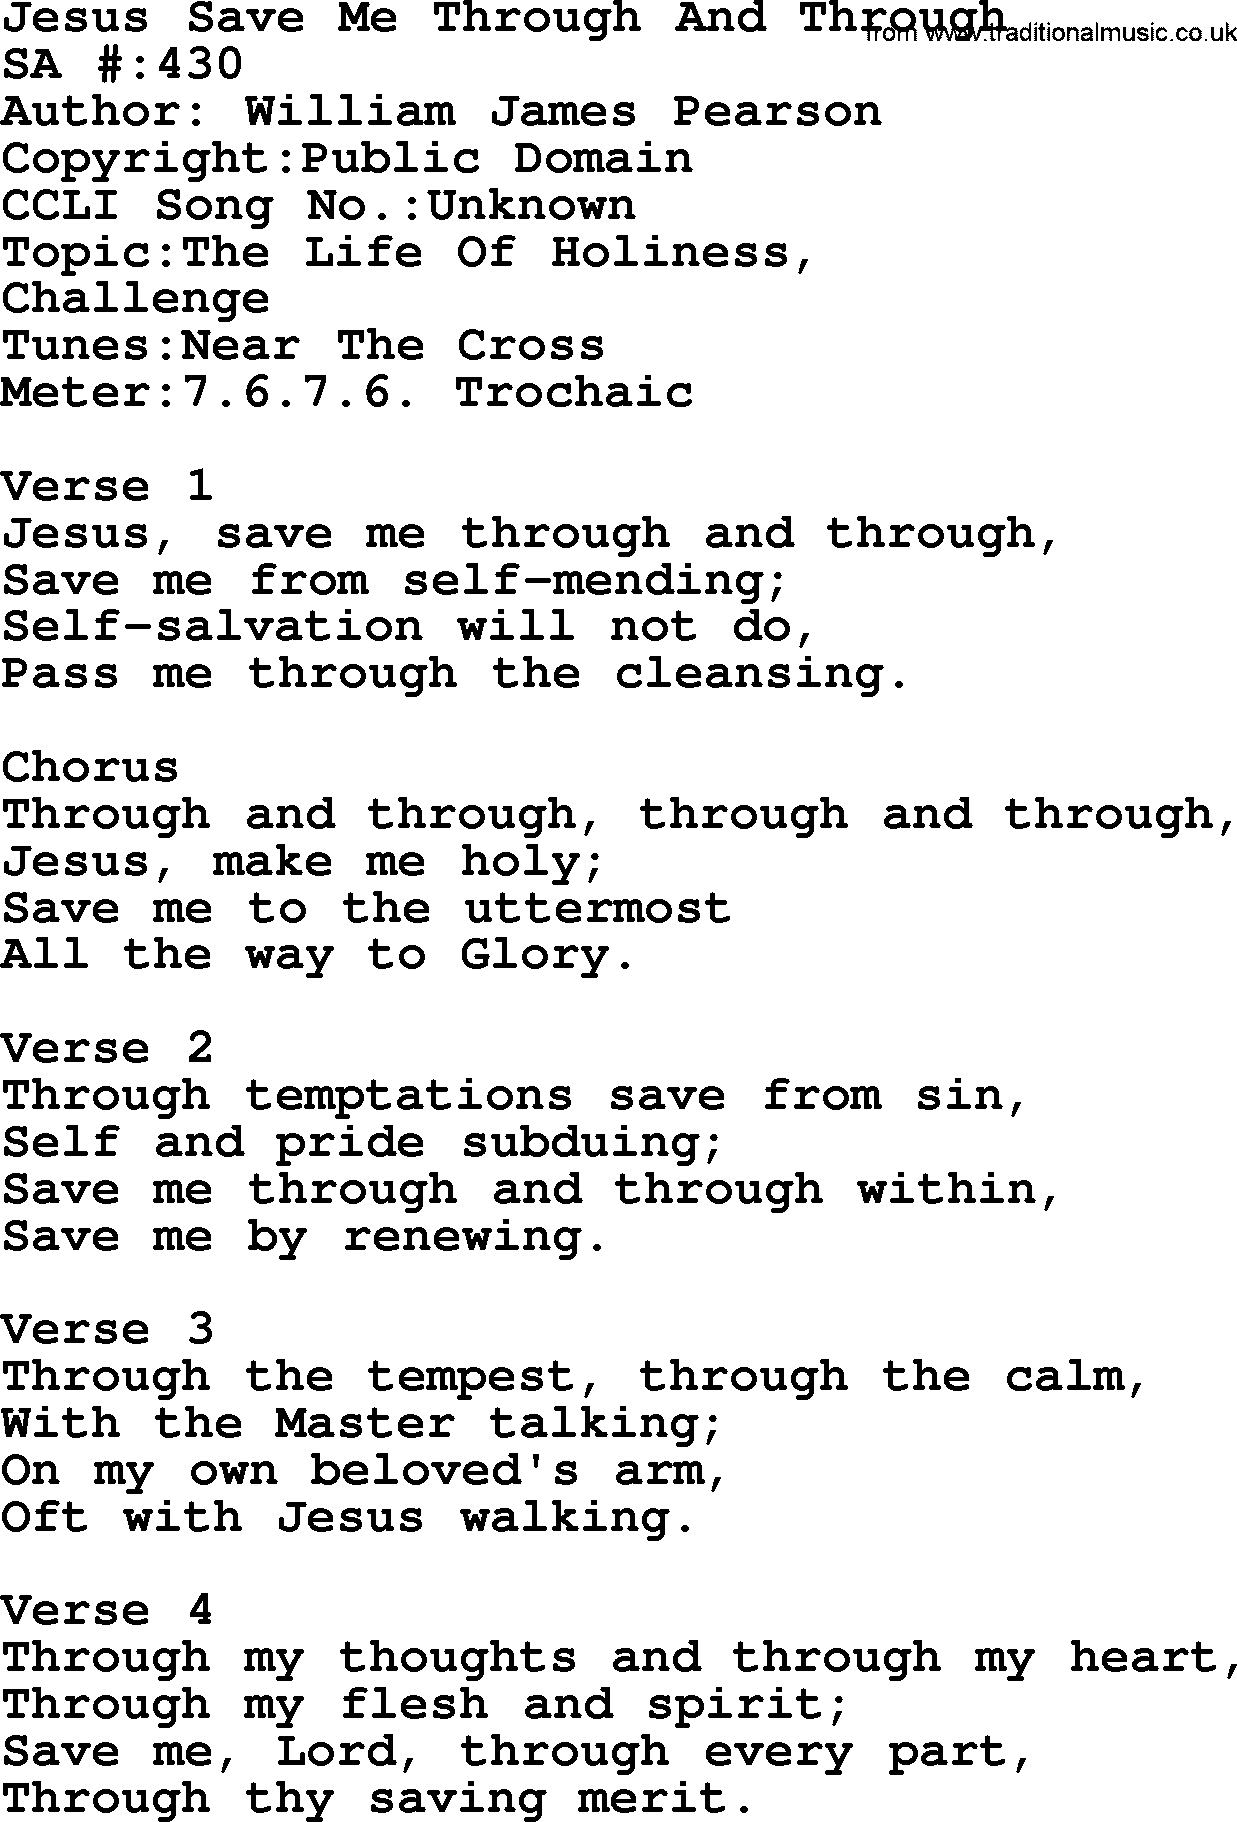 Salvation Army Hymnal, title: Jesus Save Me Through And Through, with lyrics and PDF,